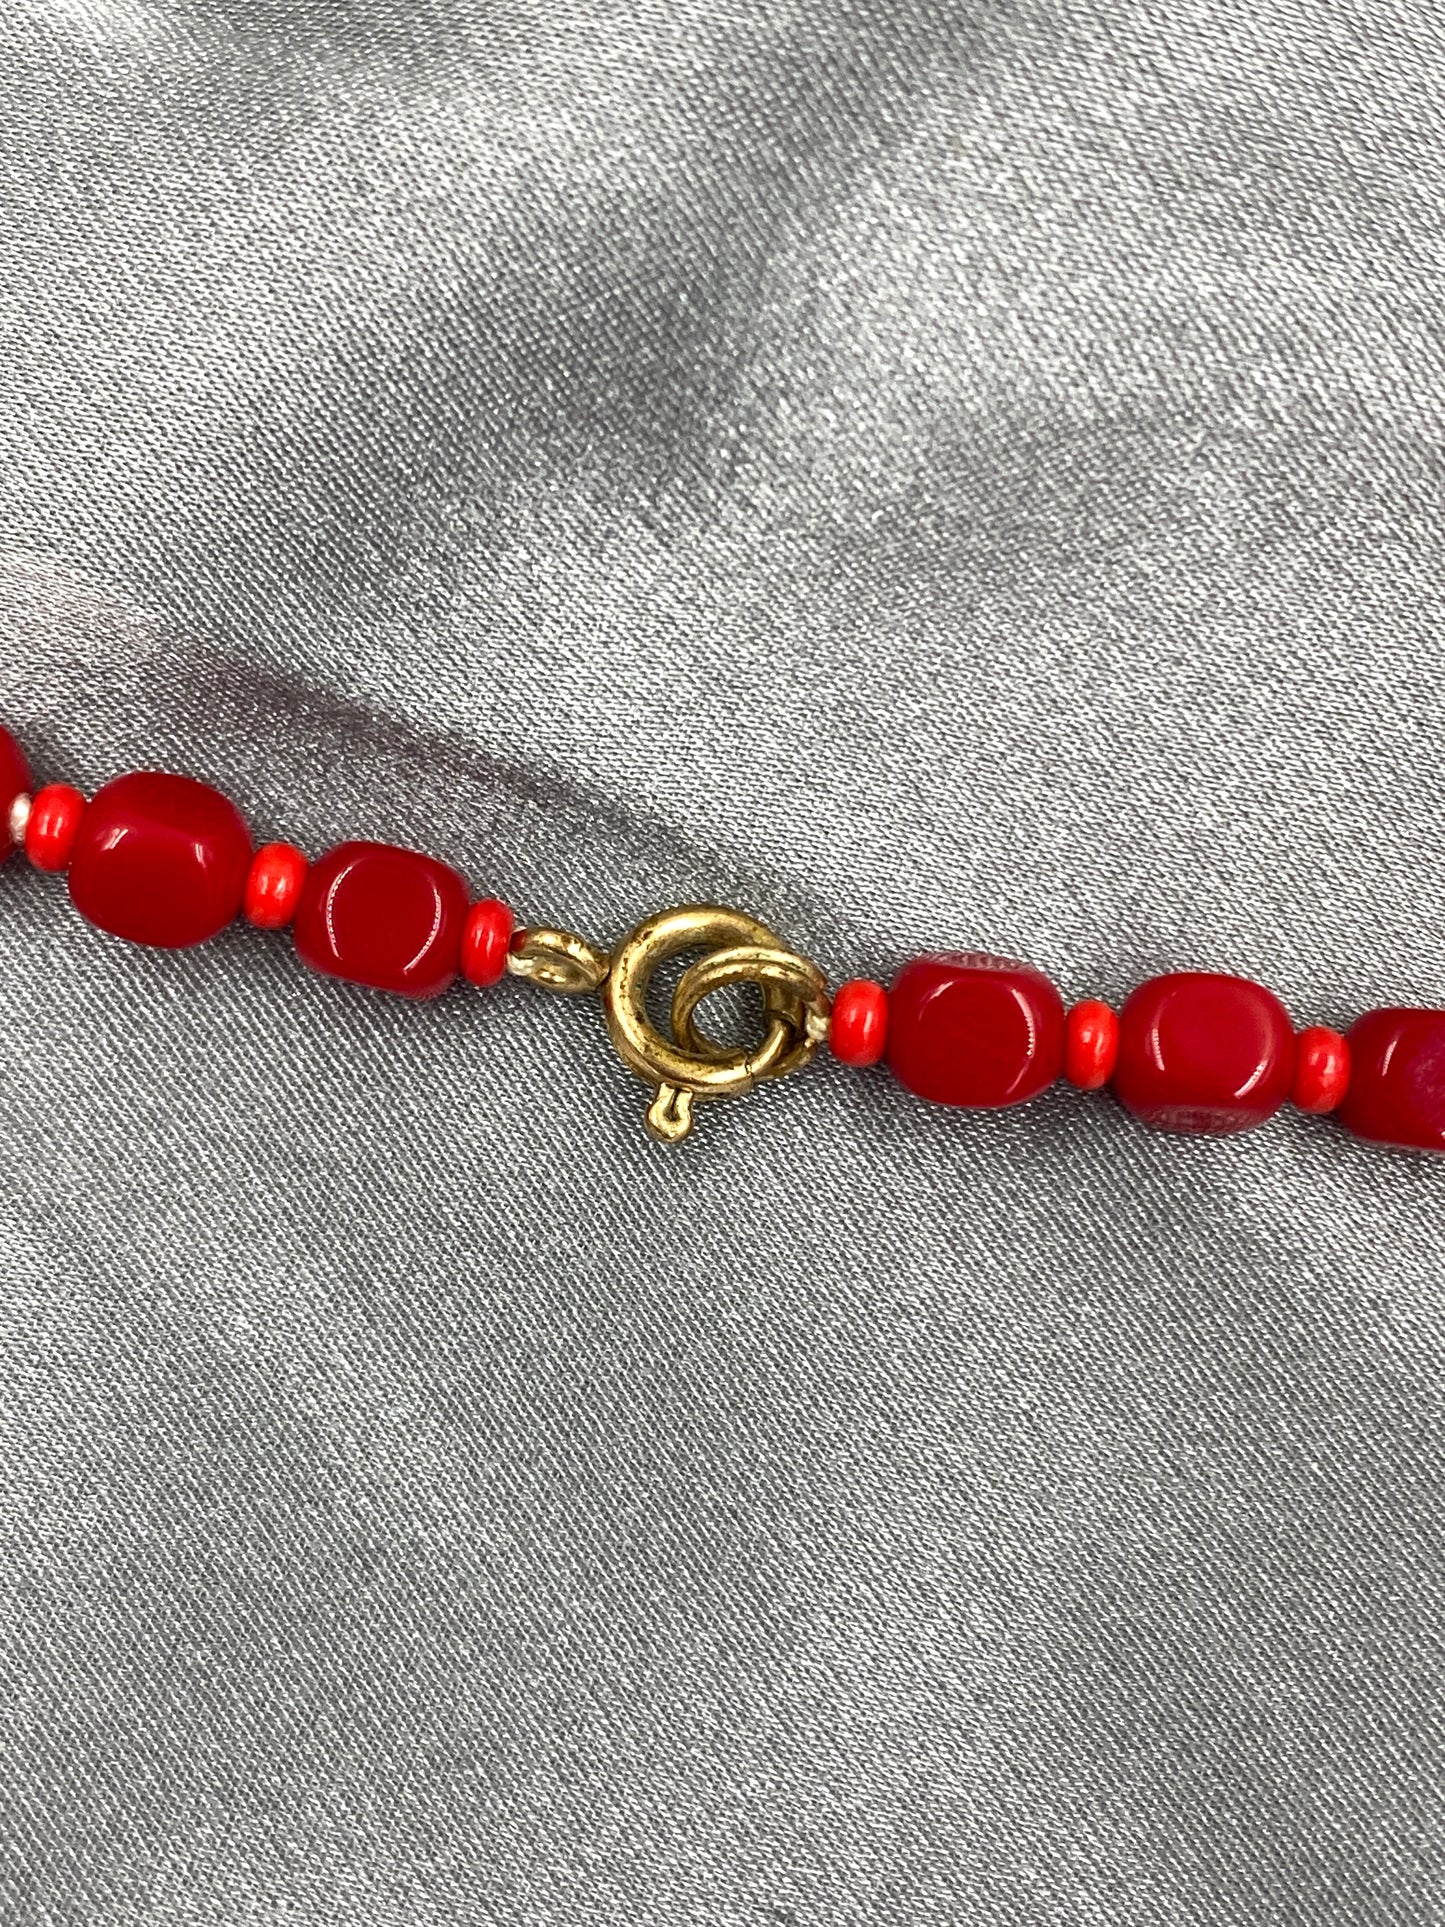 Vintage 1930s Red Glass Bead Necklace